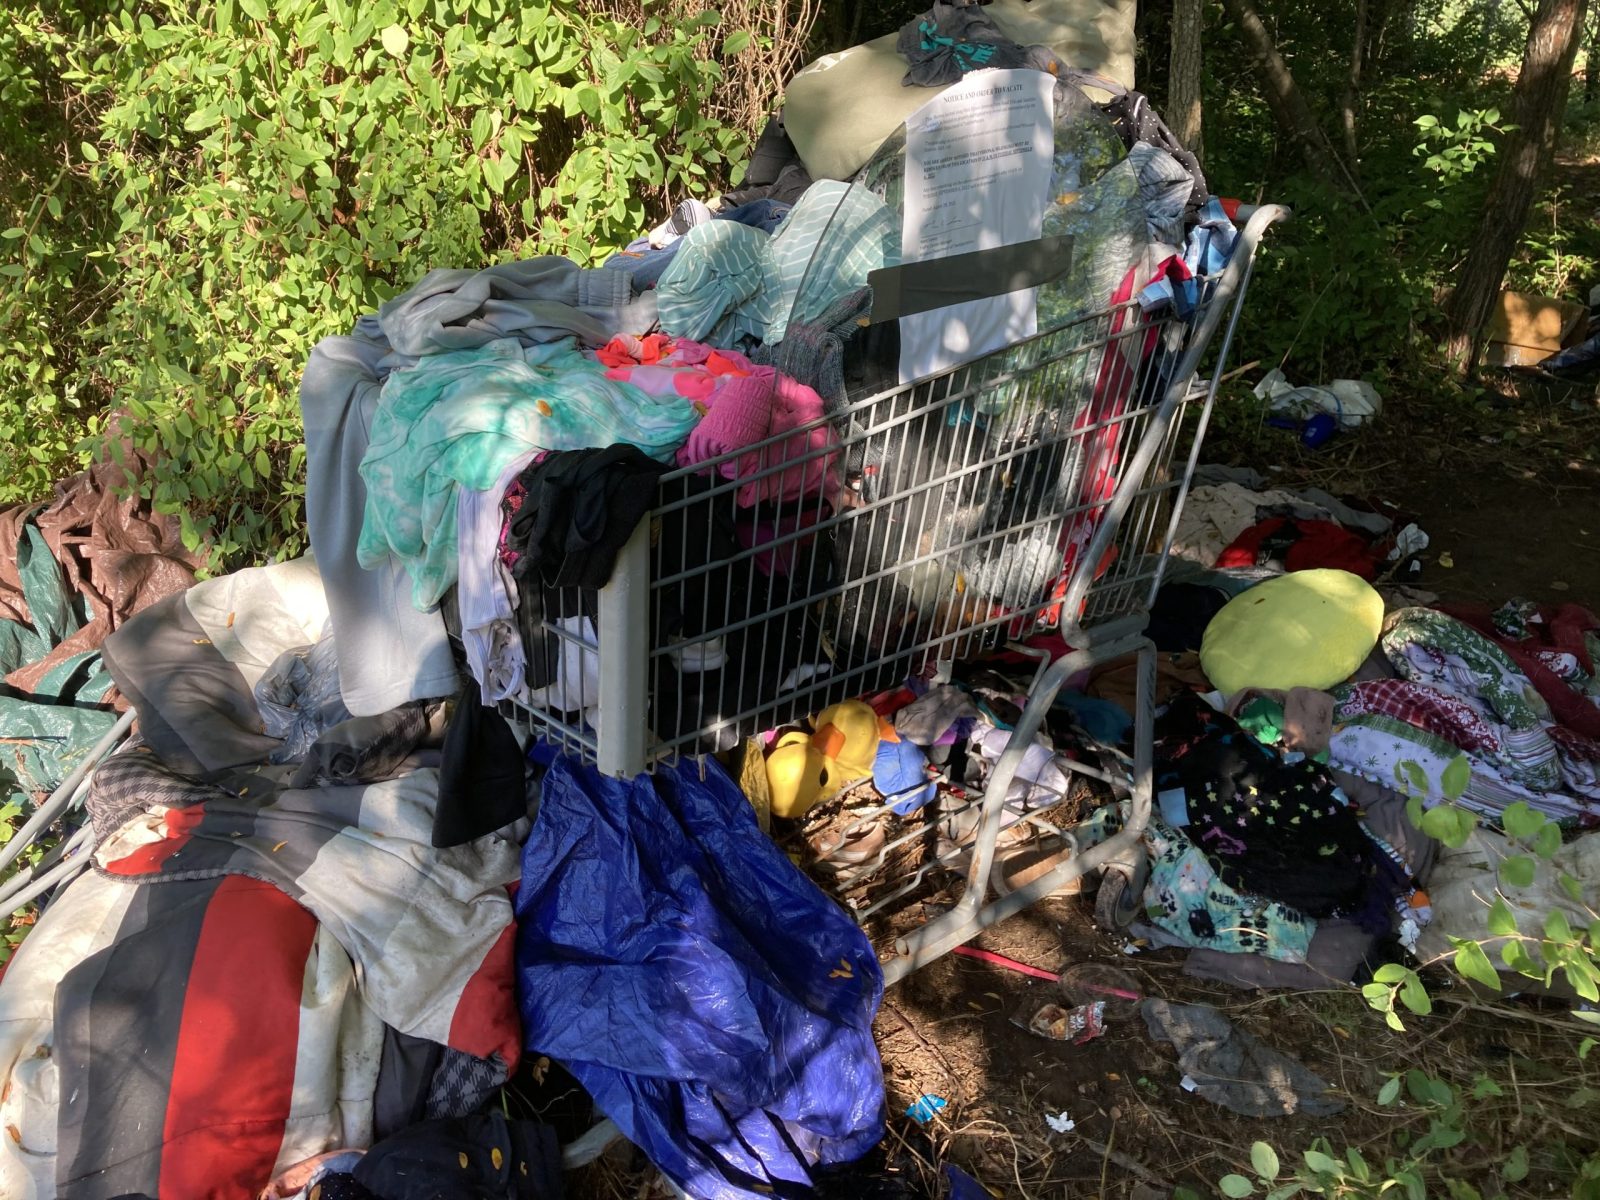 This is a photo of a shopping cart filled with clothing and blankets at the site of a former homeless camp. A trespassing notice has been attached to the shopping cart.